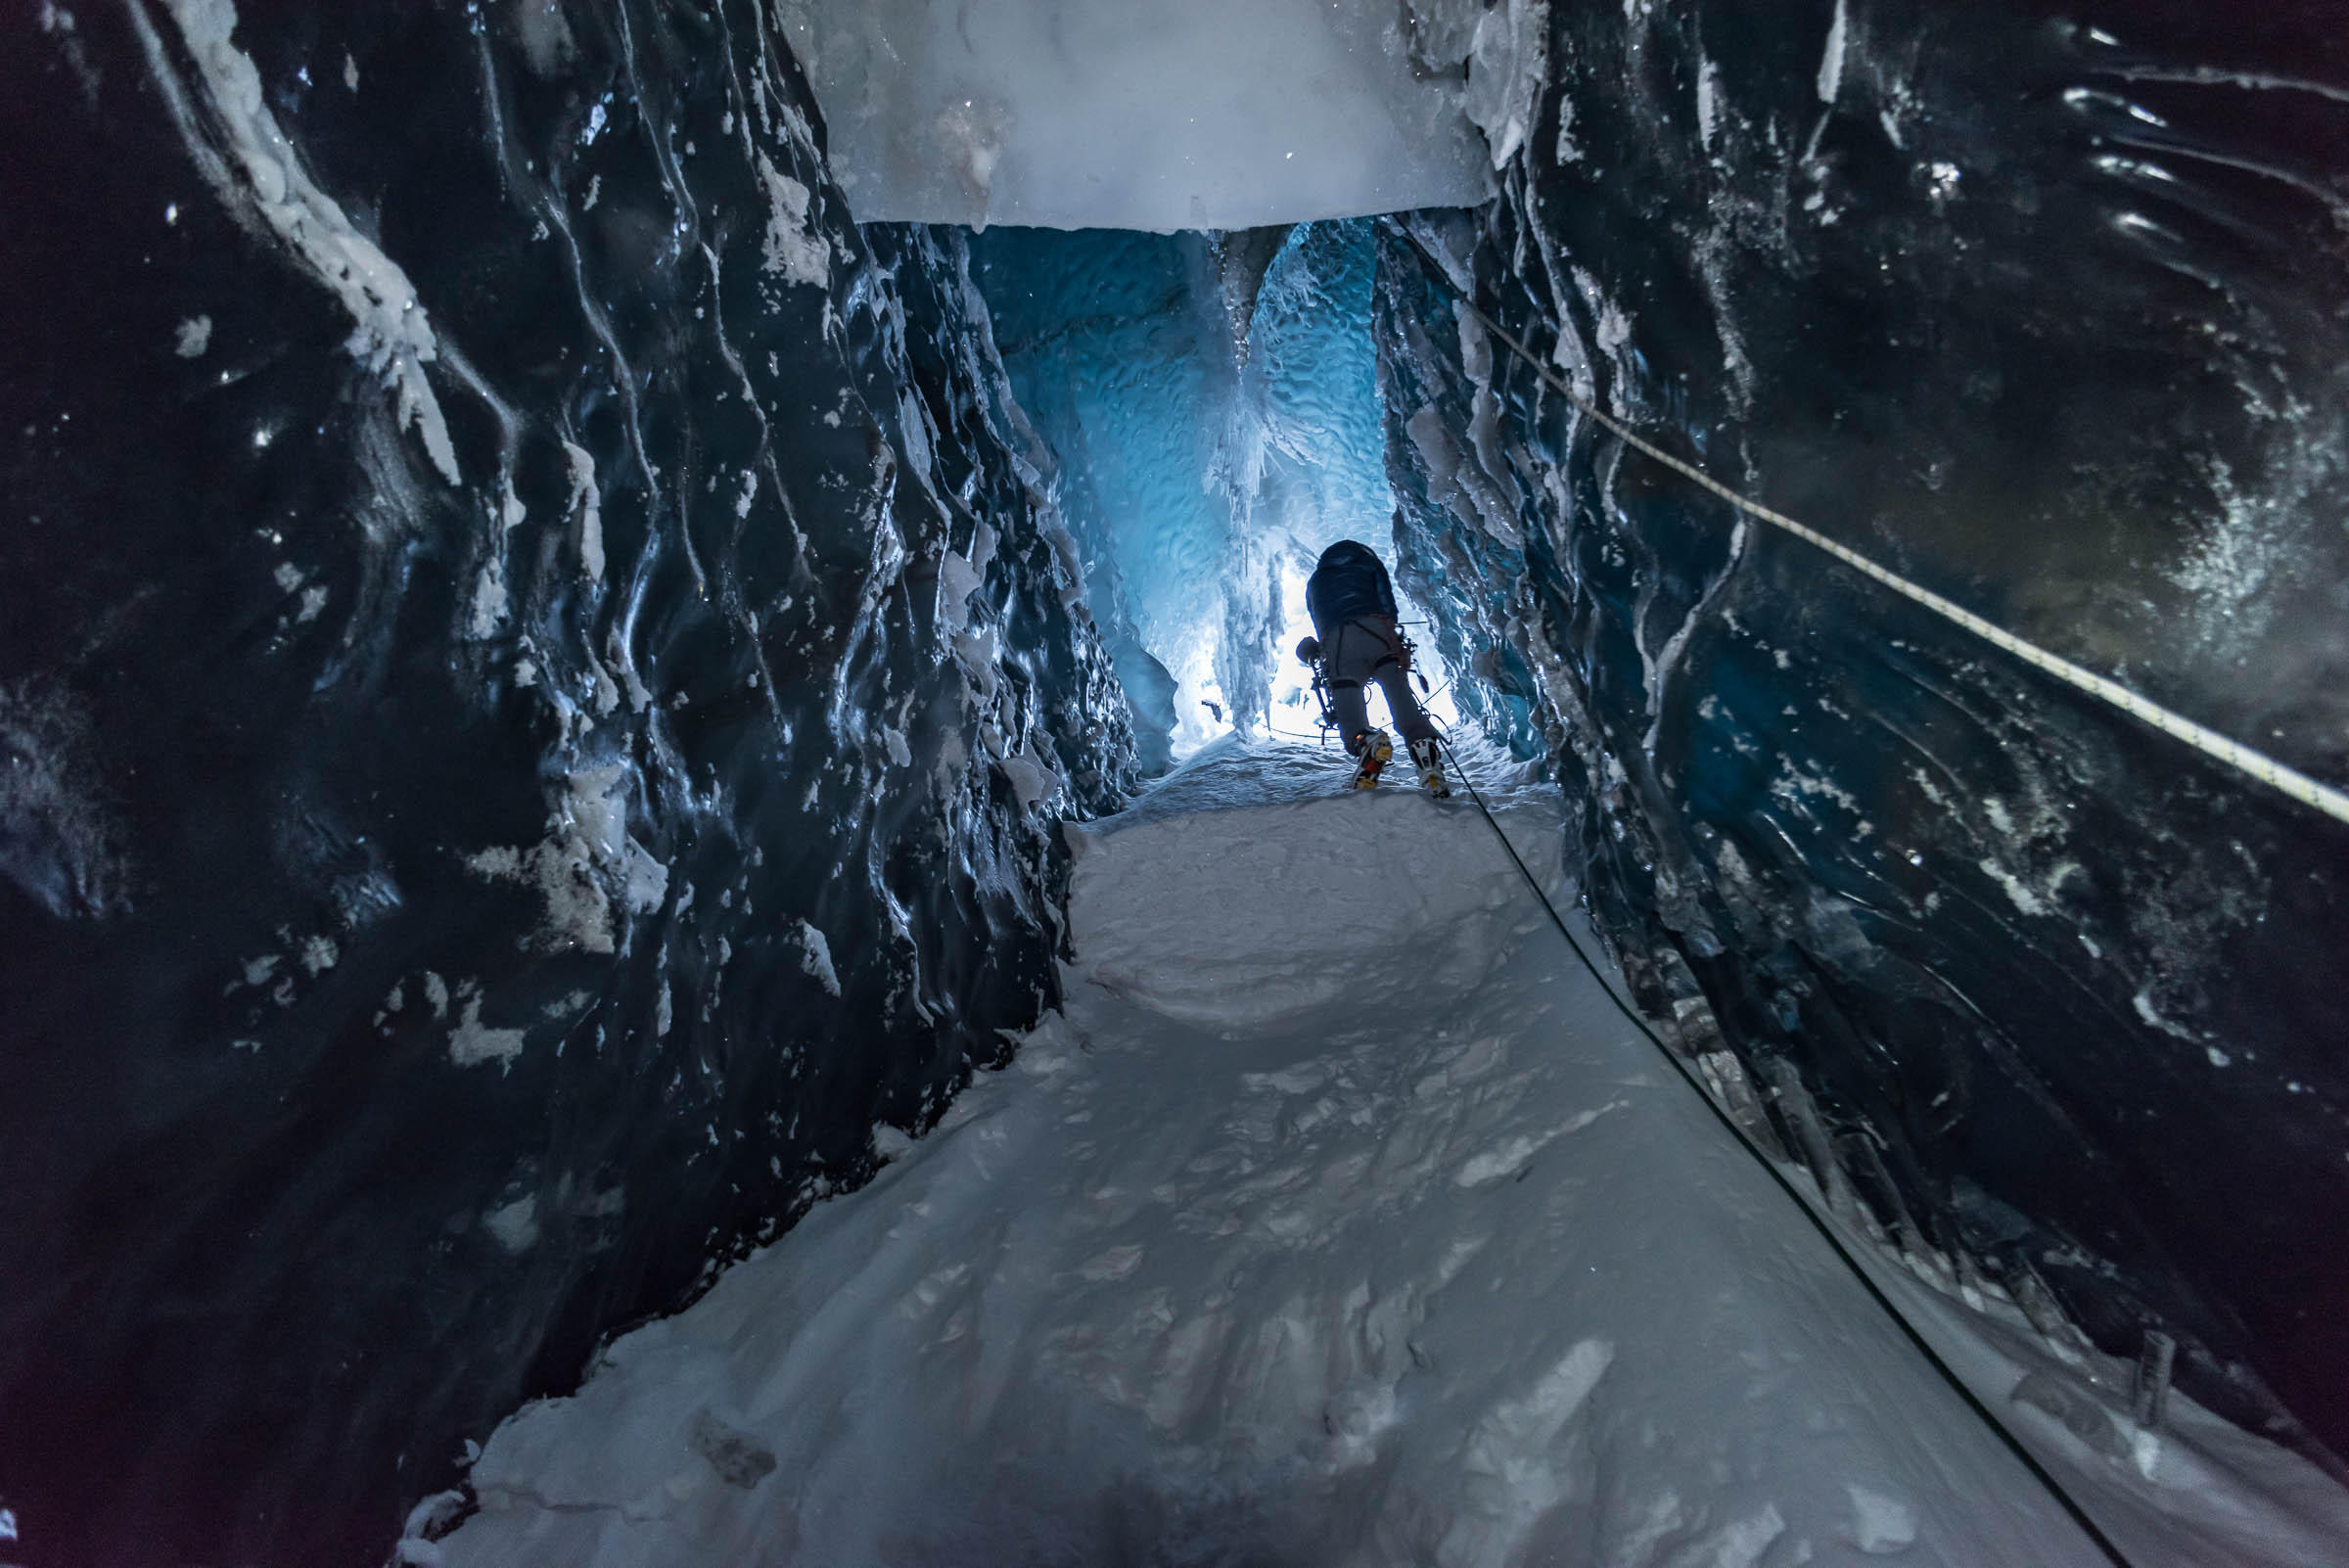 Man climbs up a shaft in the glacier, seen from below